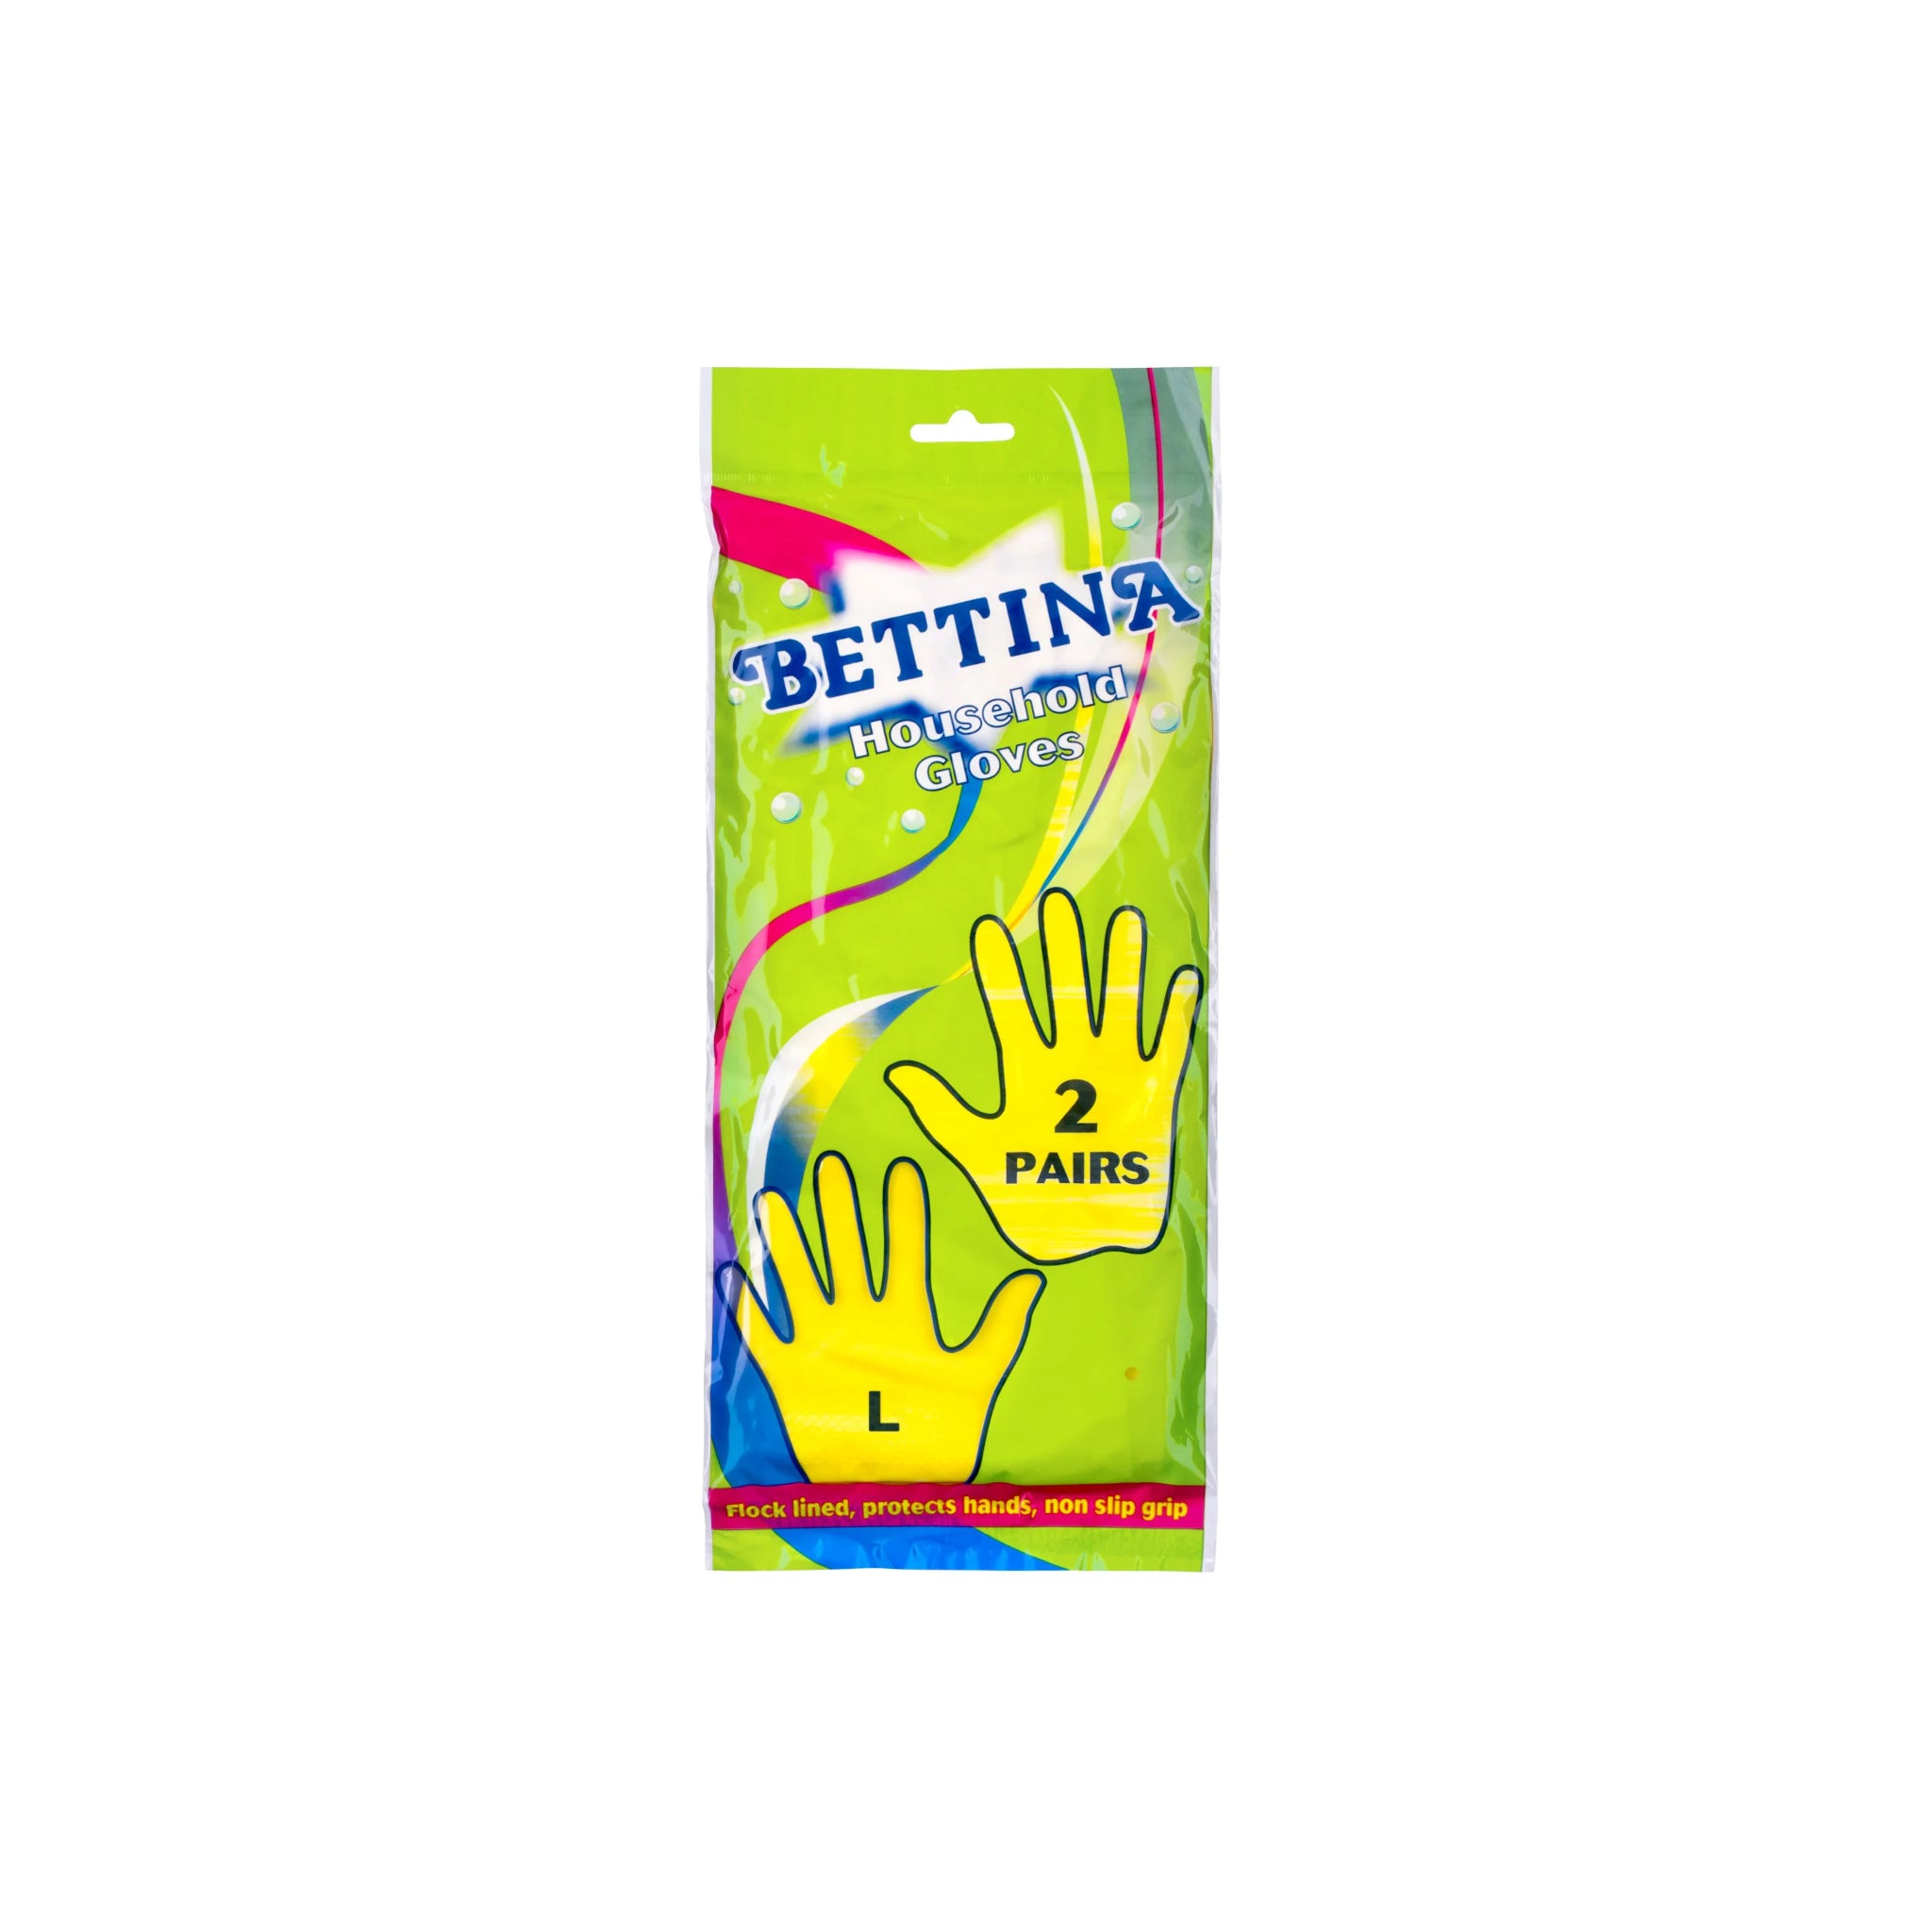 Bettina Household Gloves Large 2 Pack